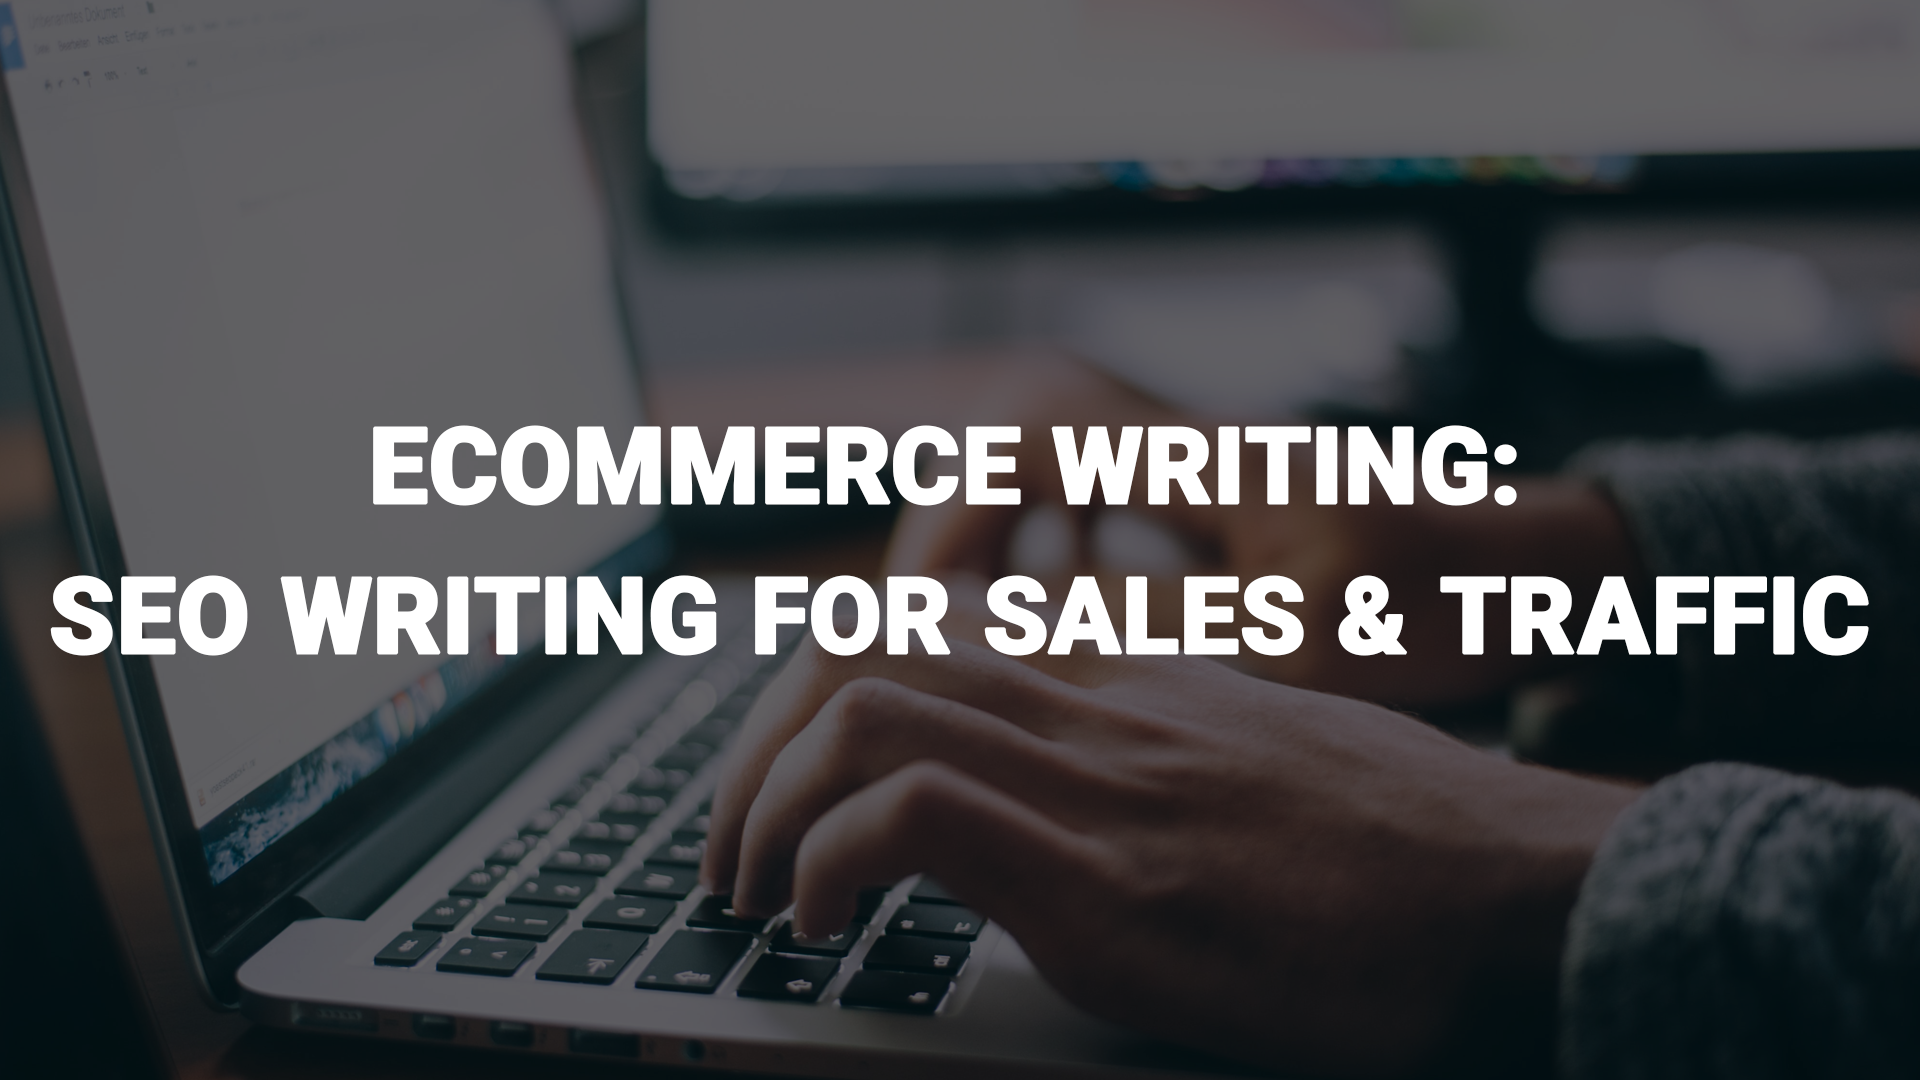 Ecommerce Writing: SEO Writing for Sales & Traffic